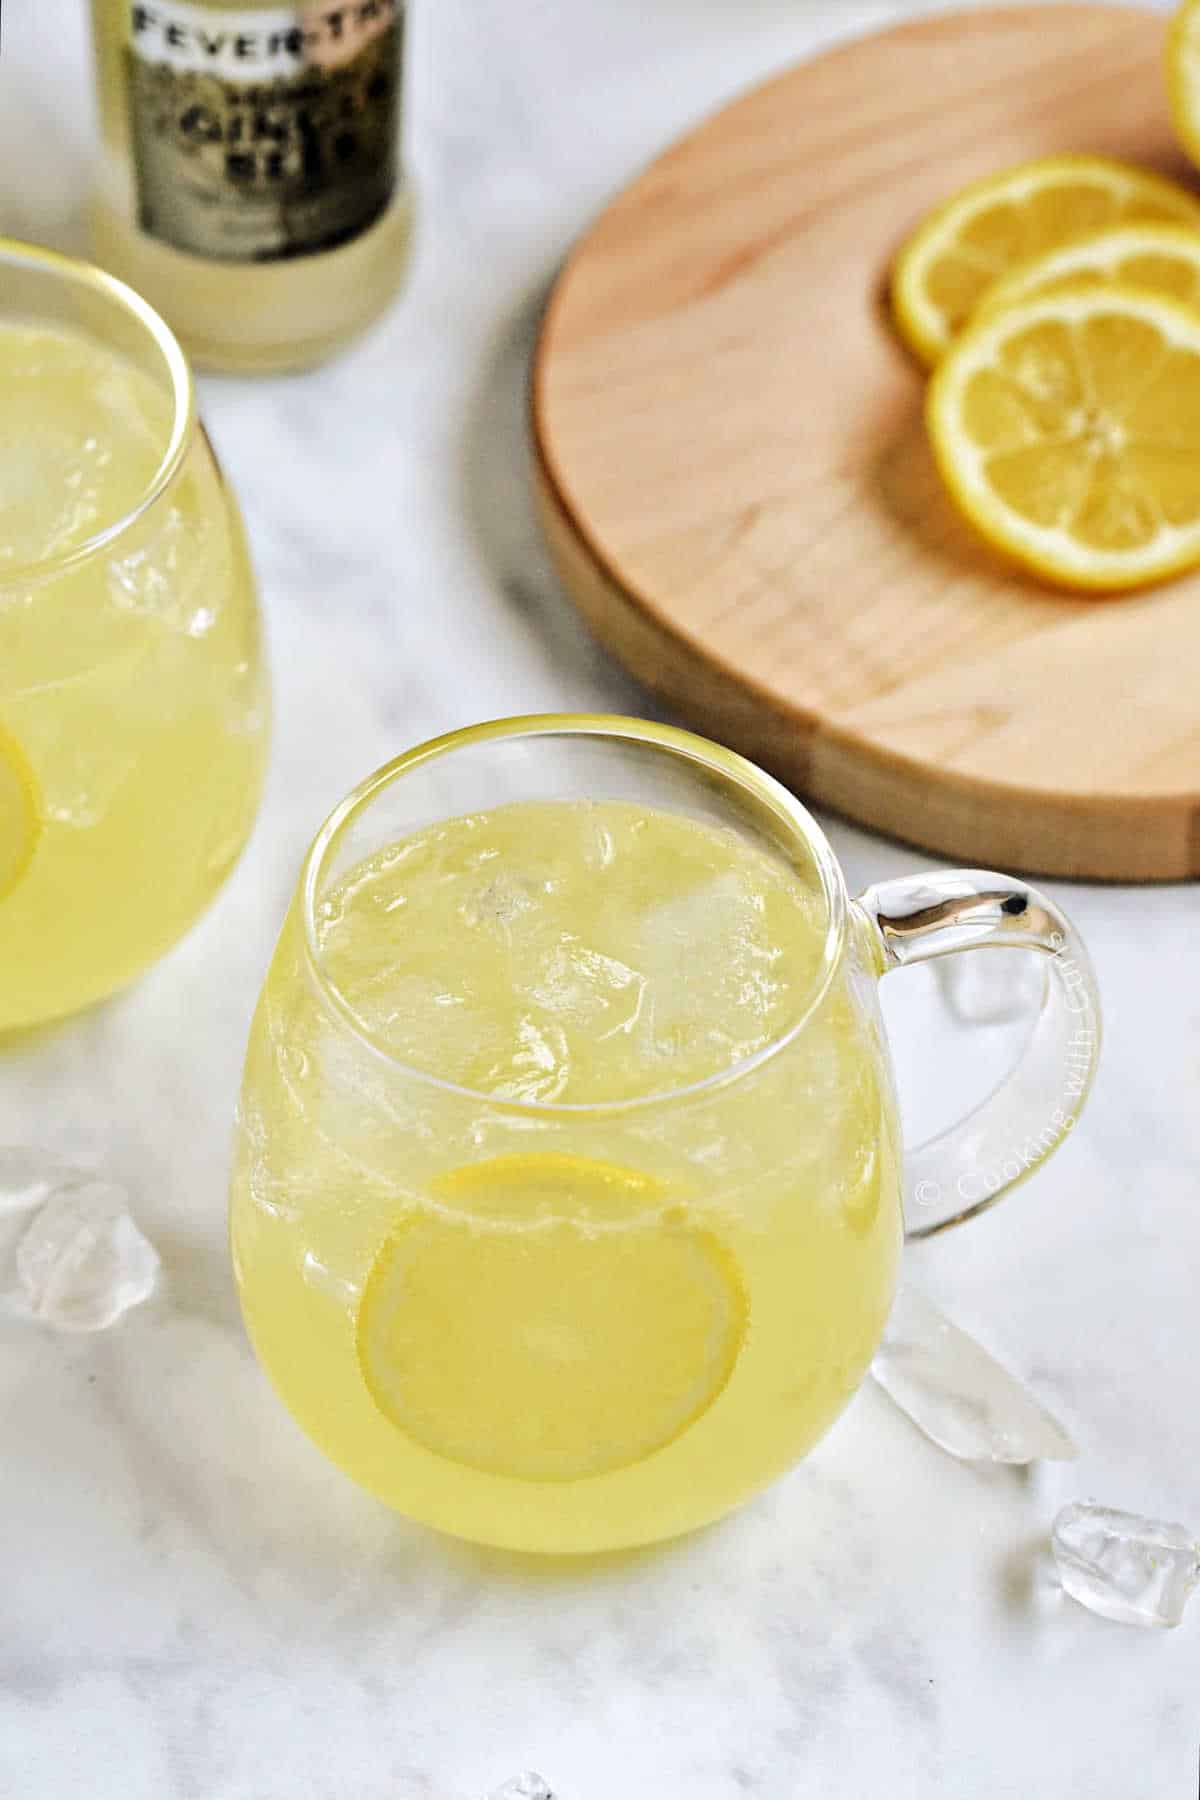 Two Limoncello Moscow Mules in a glass mug with ice and lemon wheel garnish.